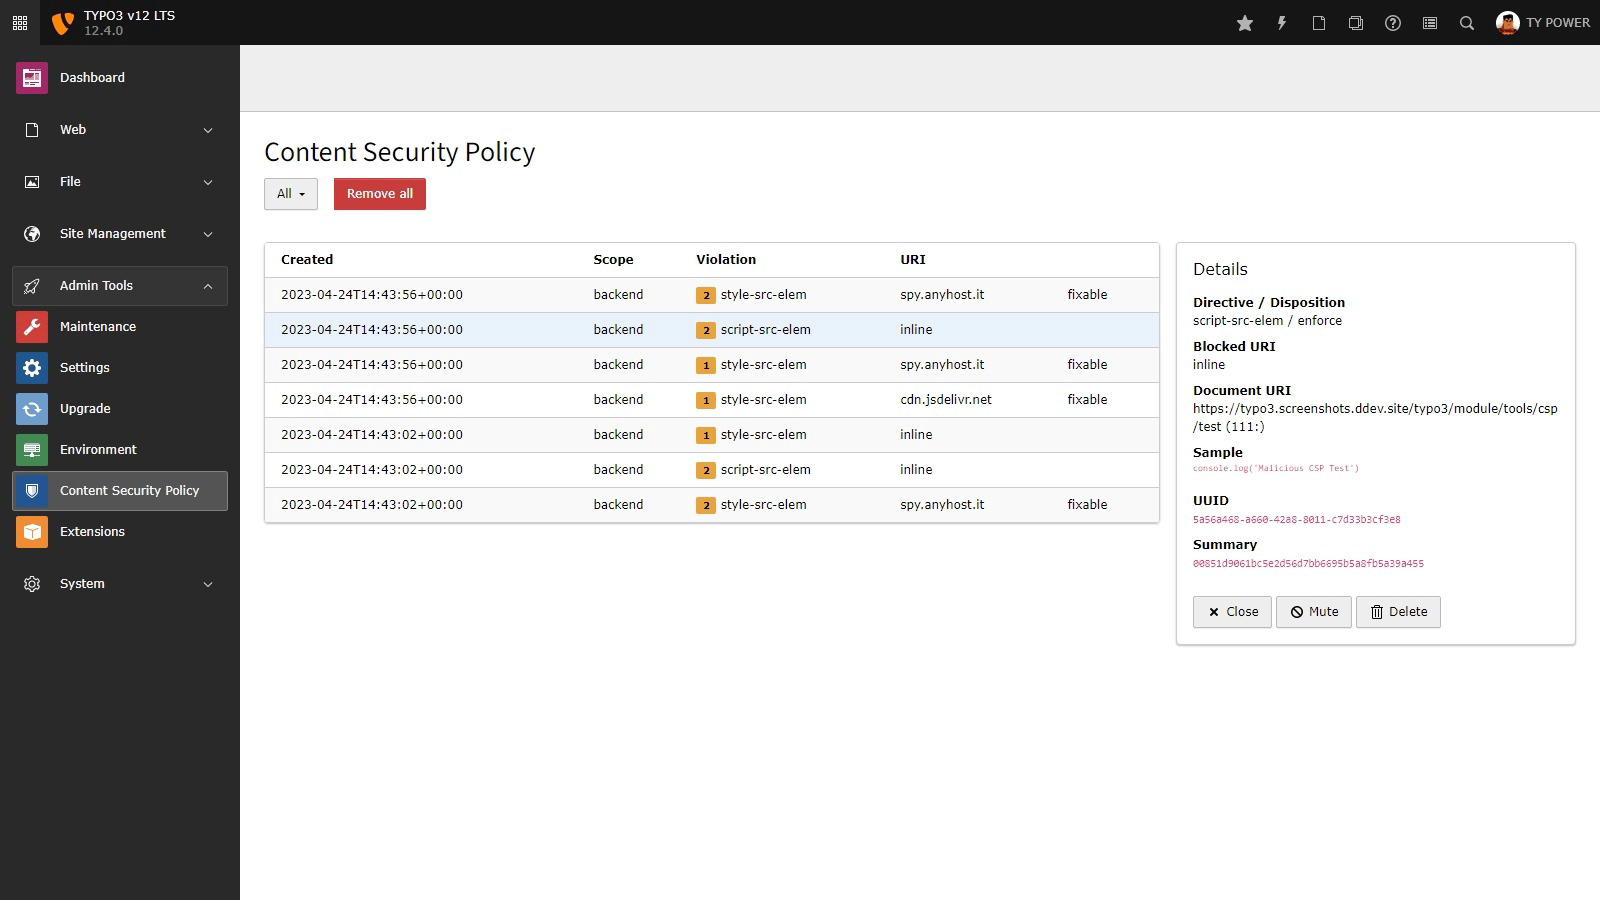 TYPO3 v12 LTS Content Security Policies